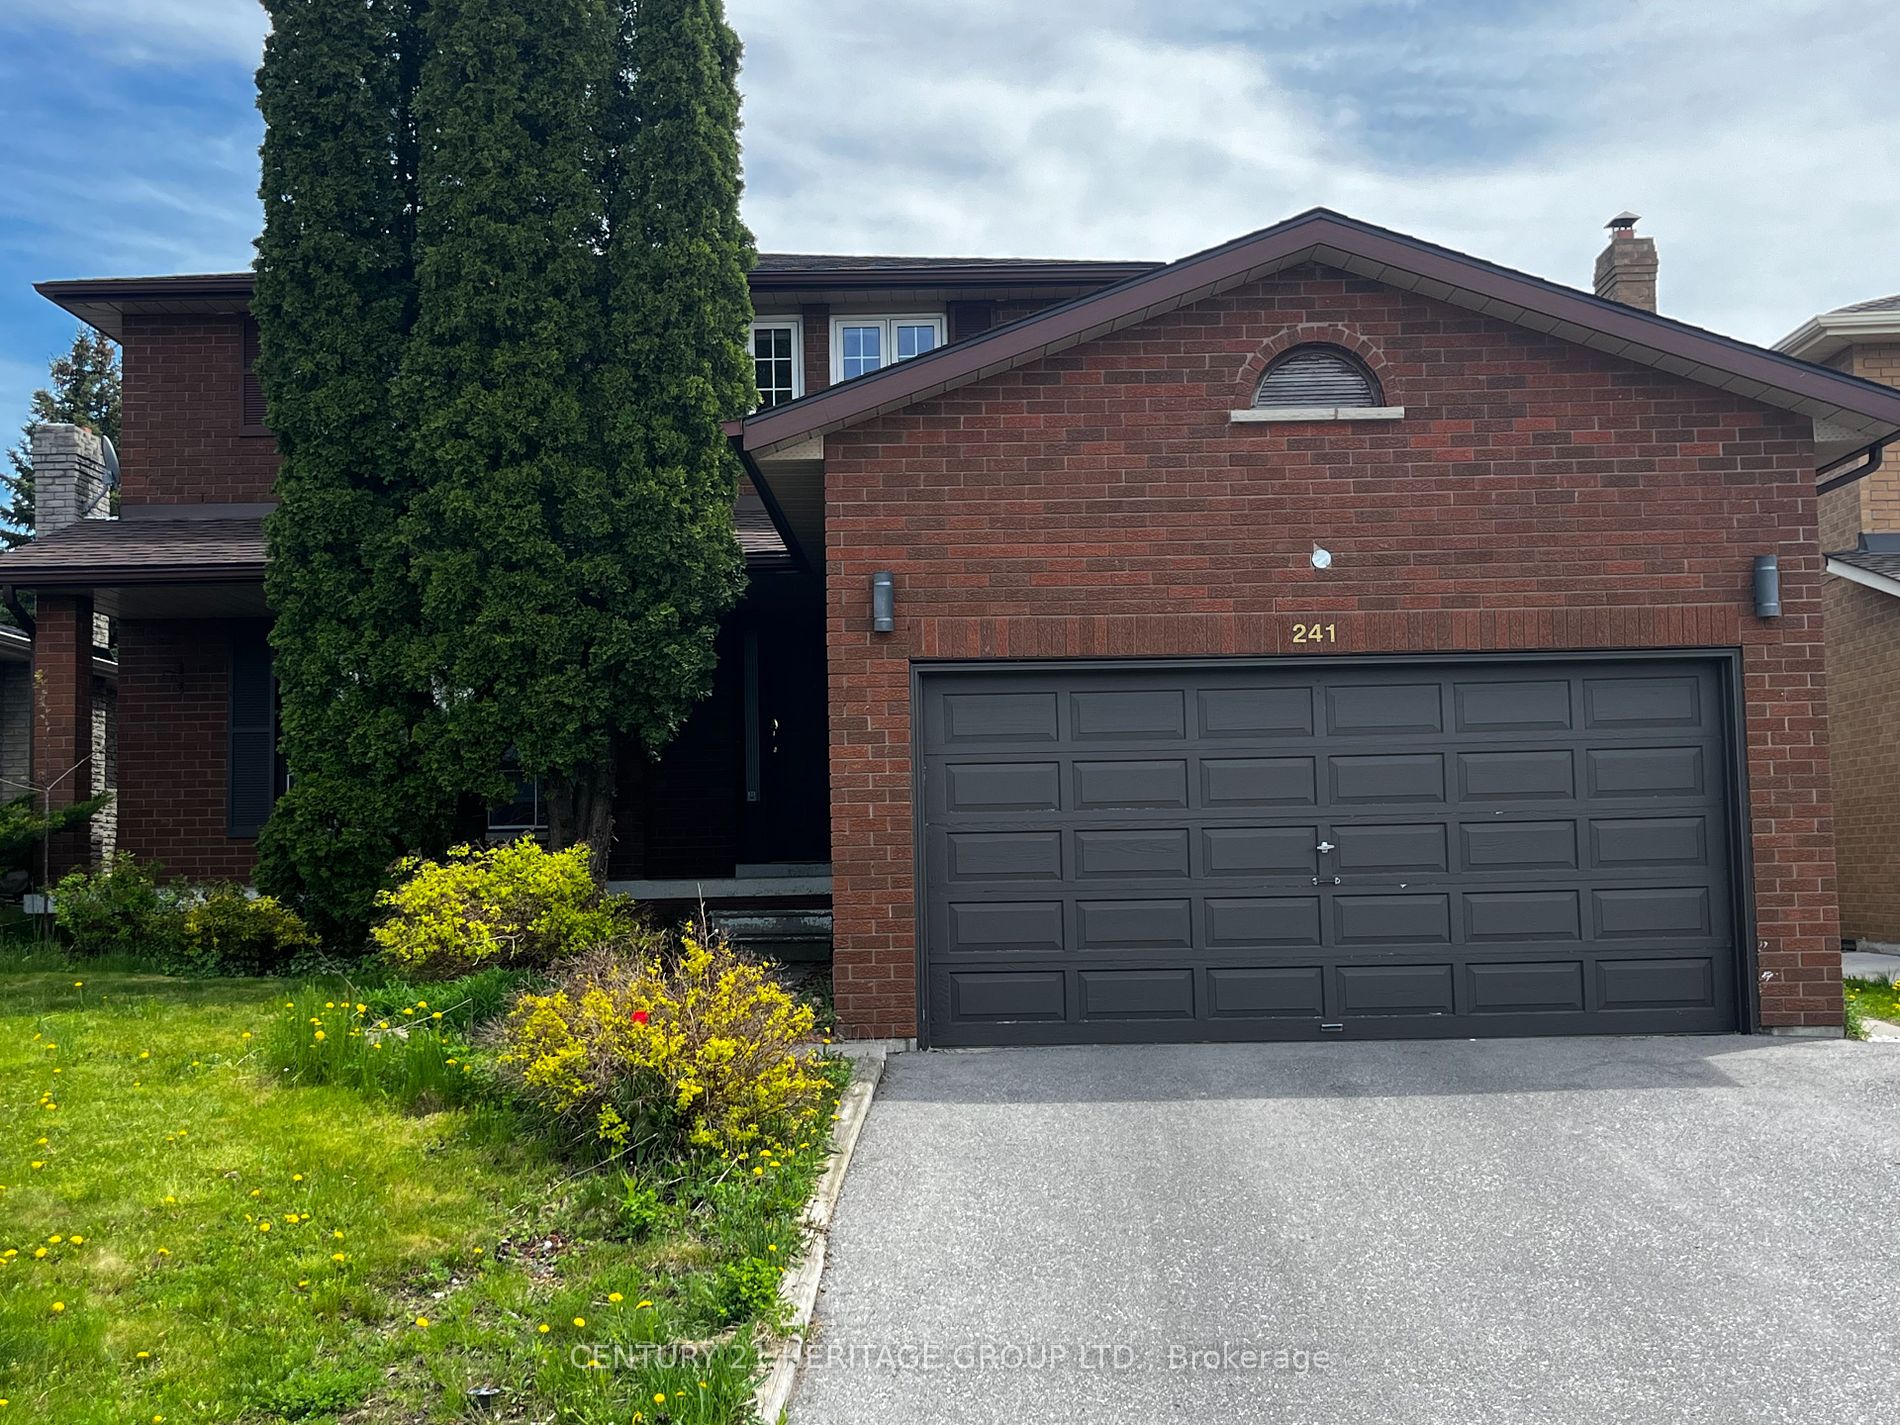 Detached house for sale at 241 Miller Park Ave Bradford West Gwillimbury Ontario